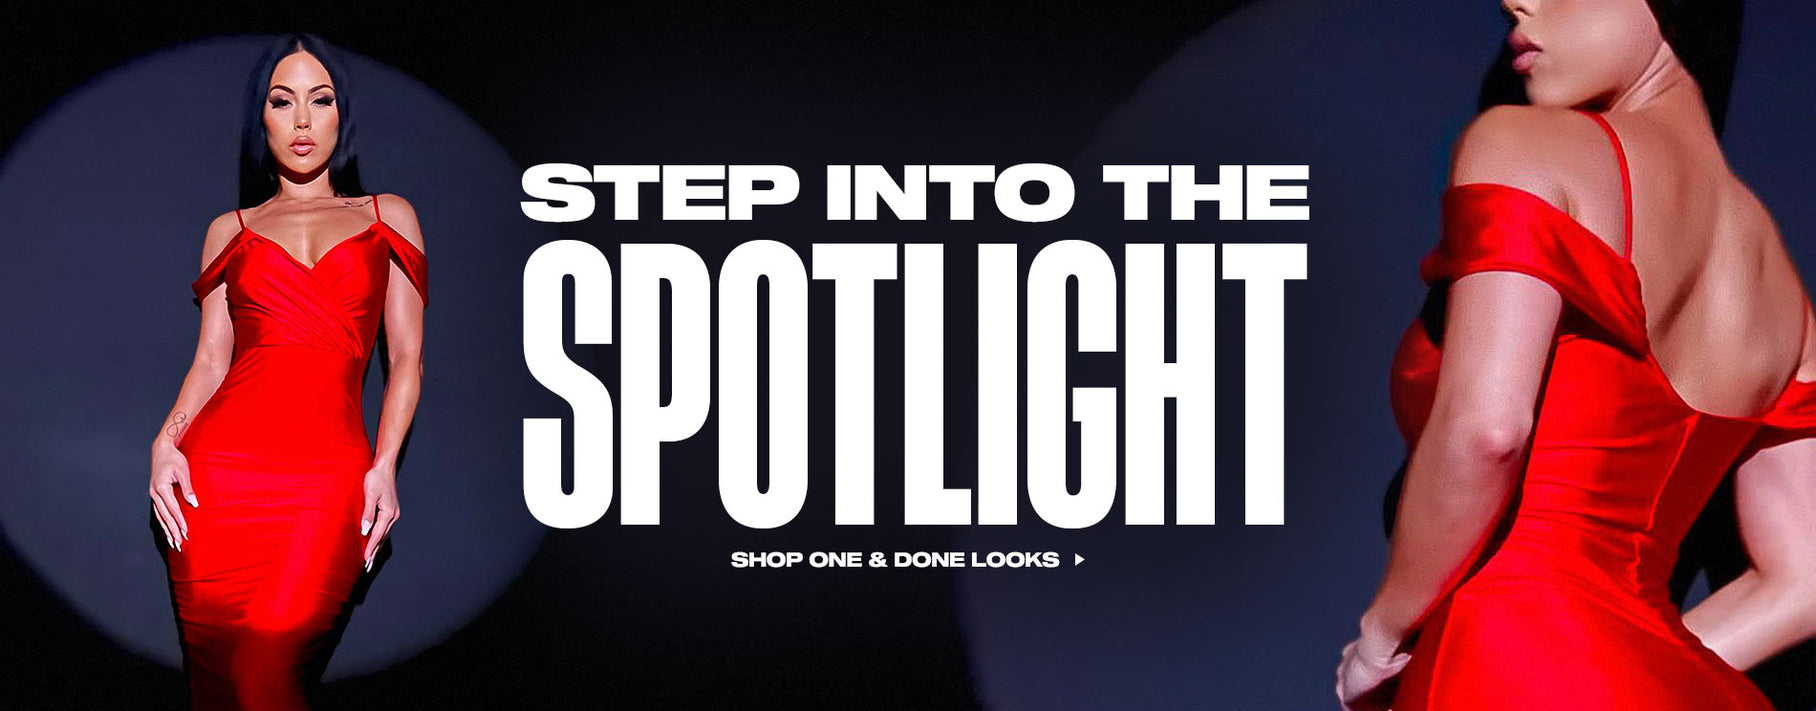 Step Into The Spotlight: Shop One & Done Looks